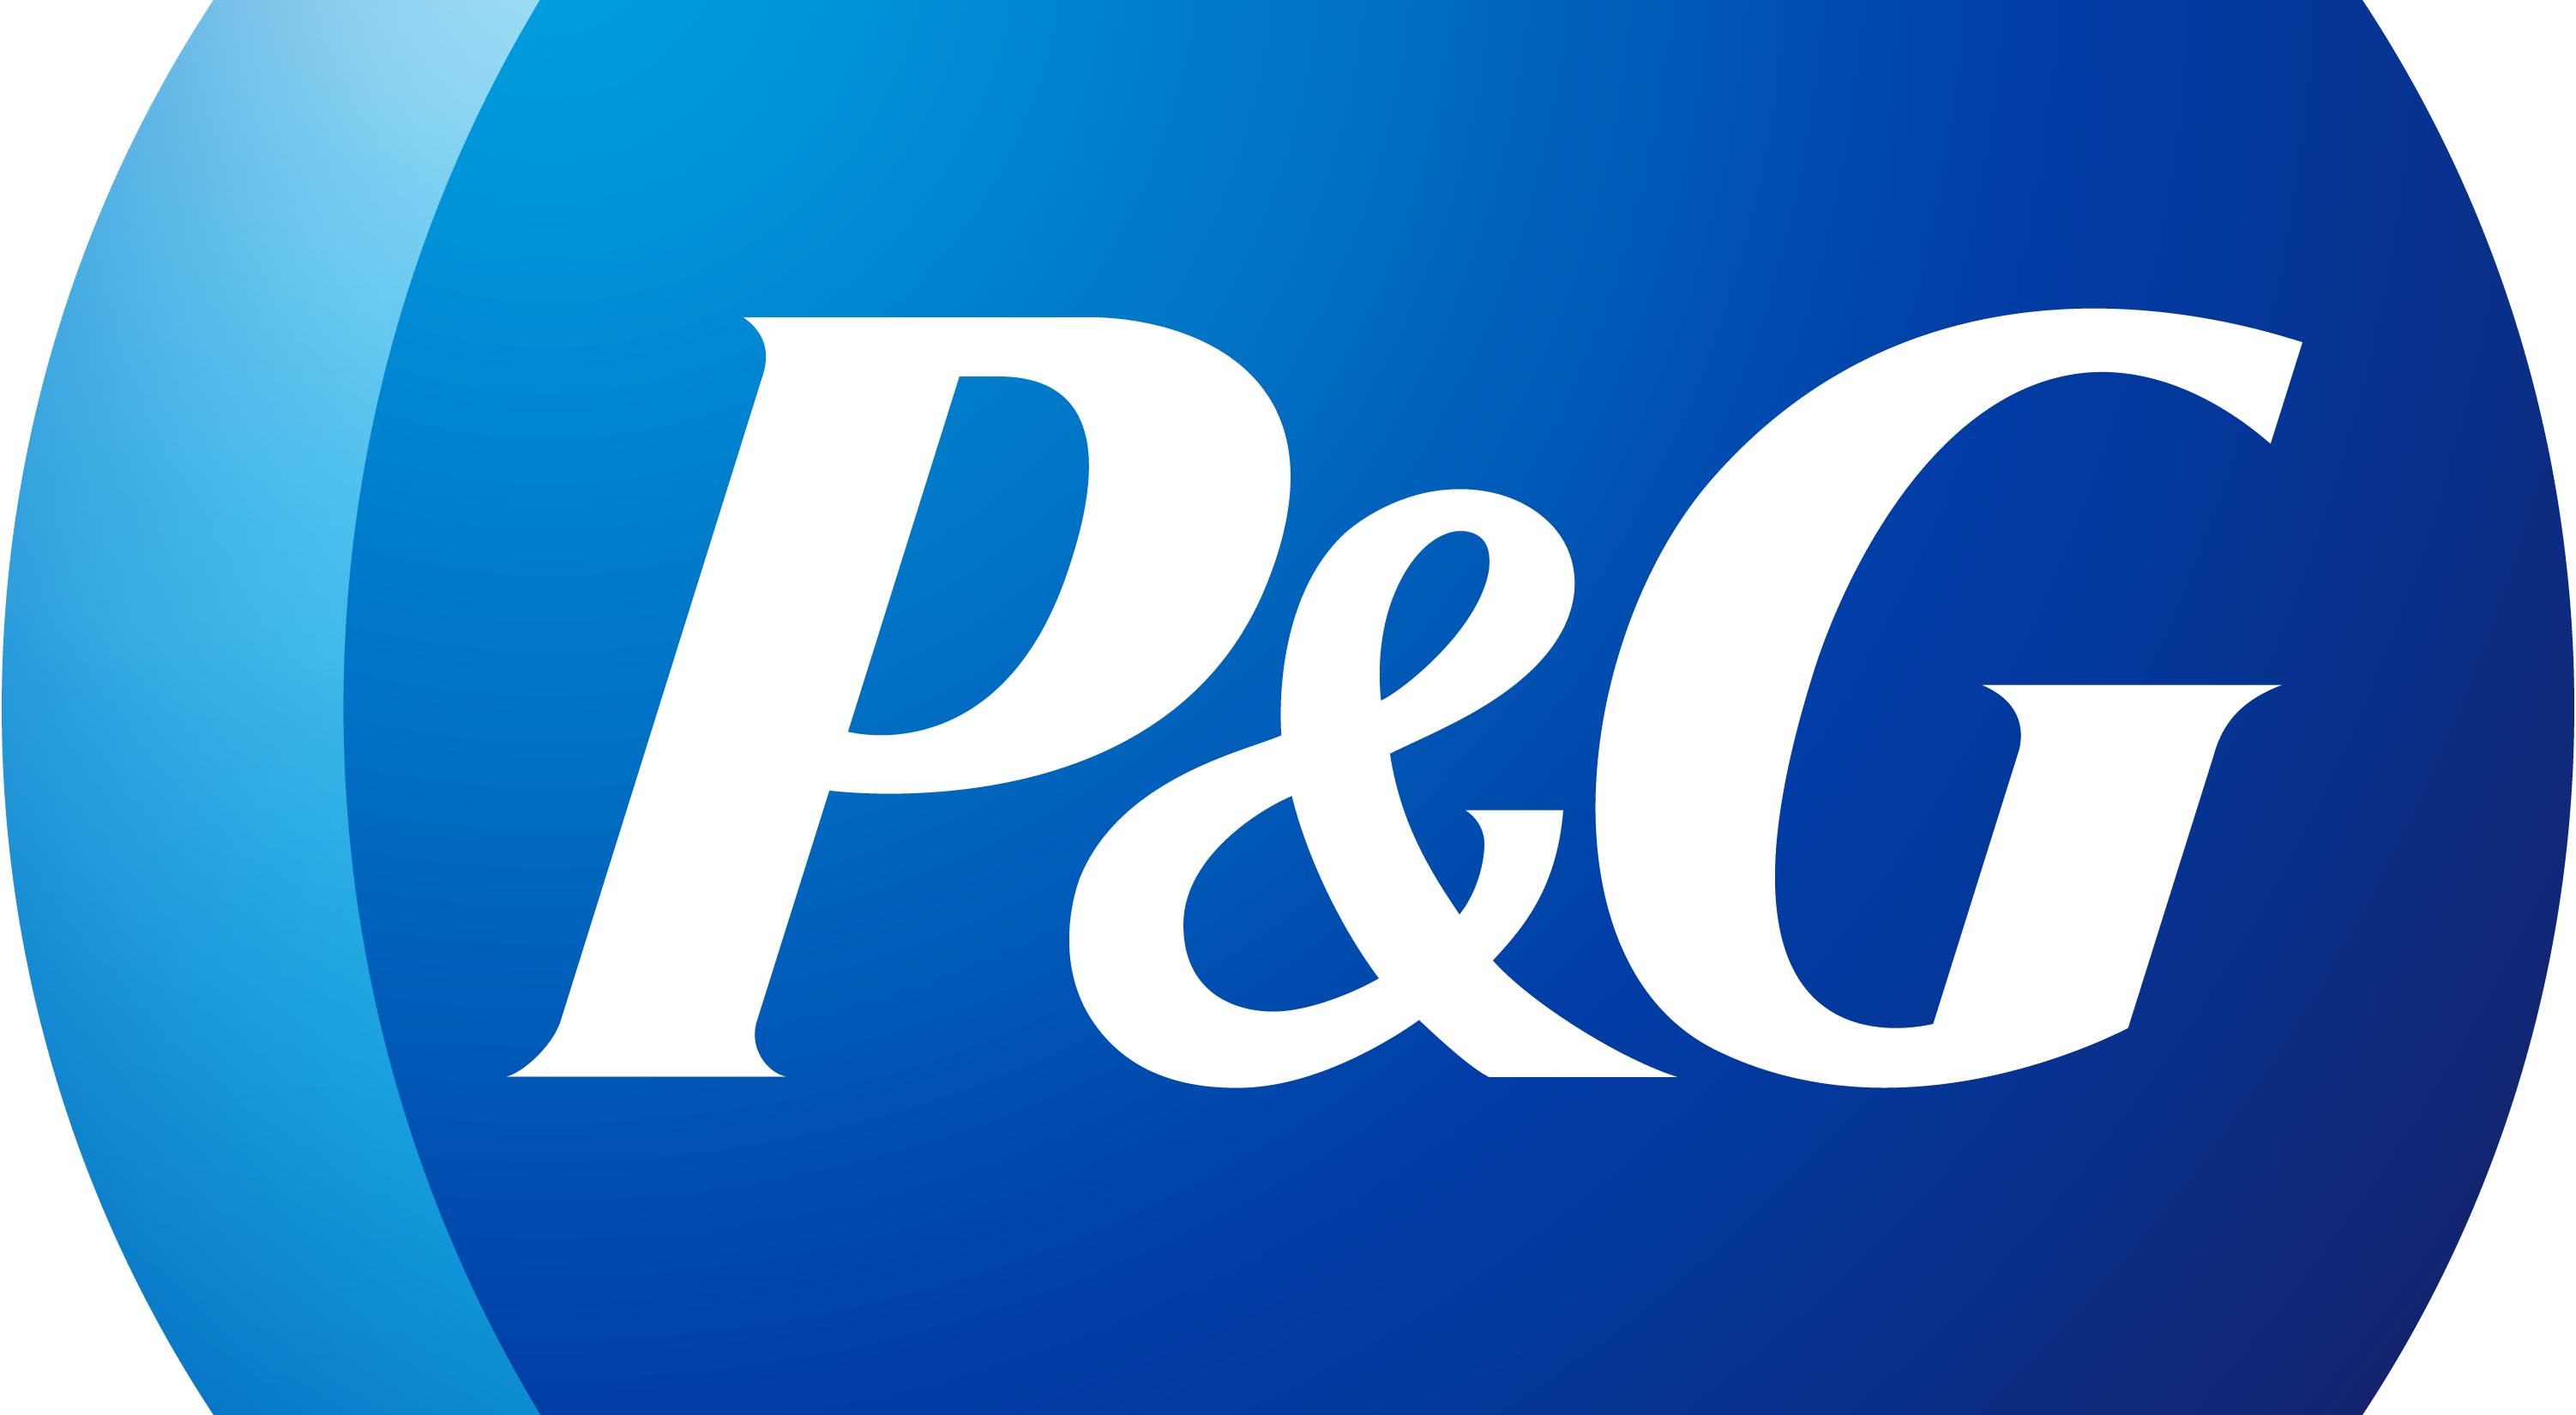 p&g case study competition